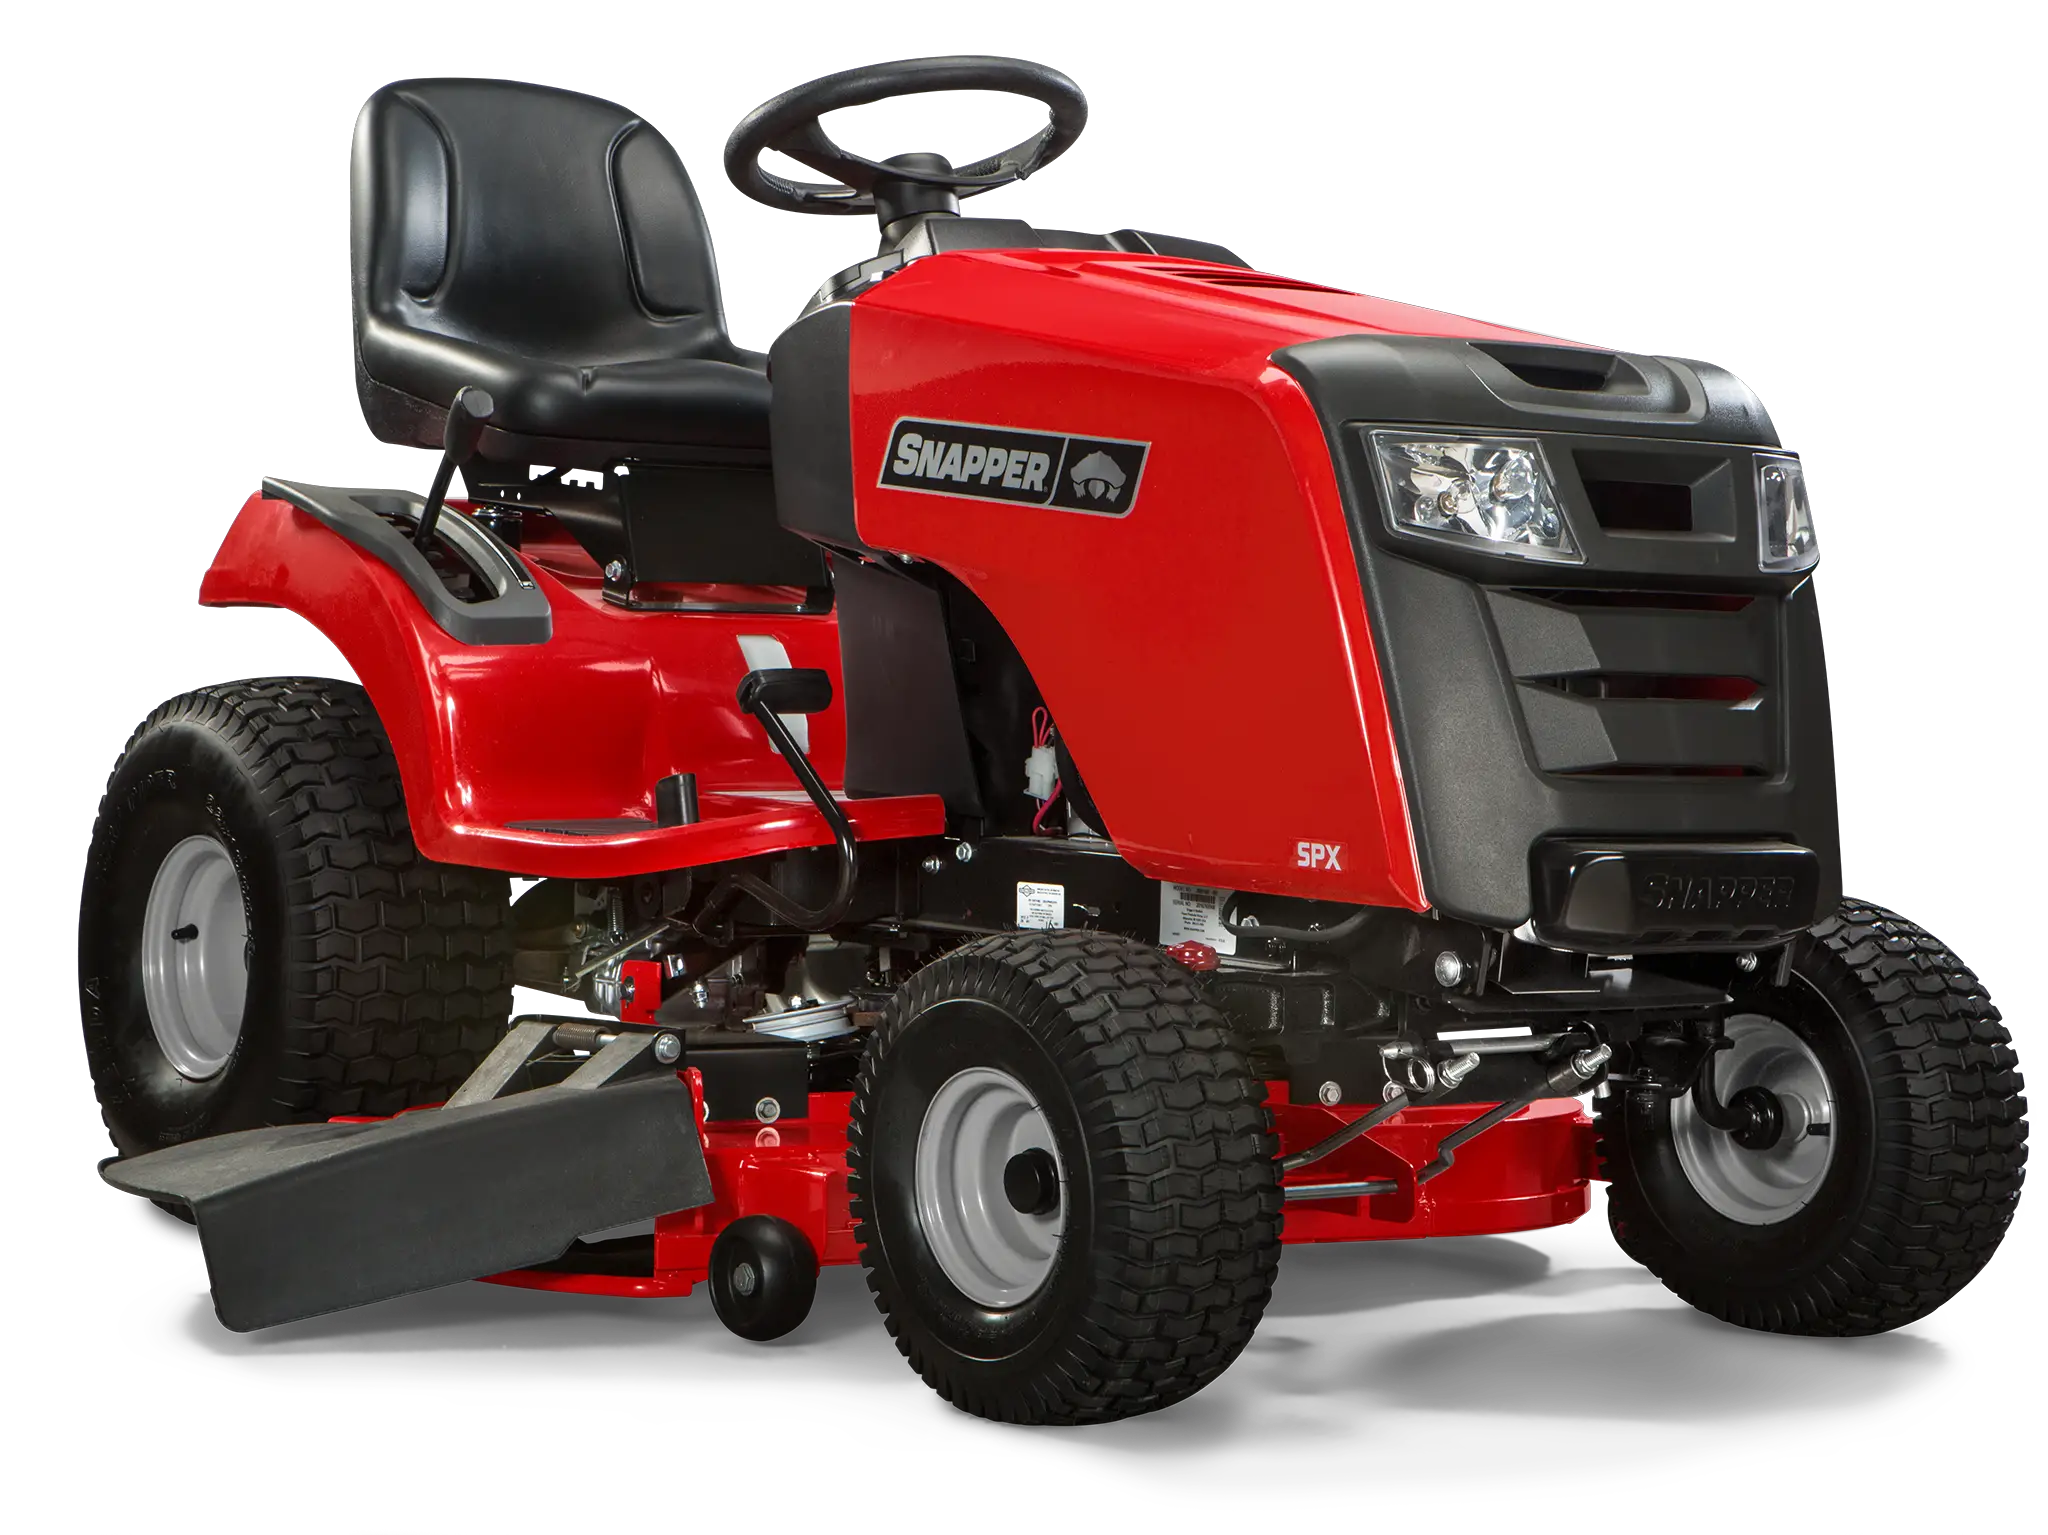 Will Lowes Deliver Riding Lawn Mowers